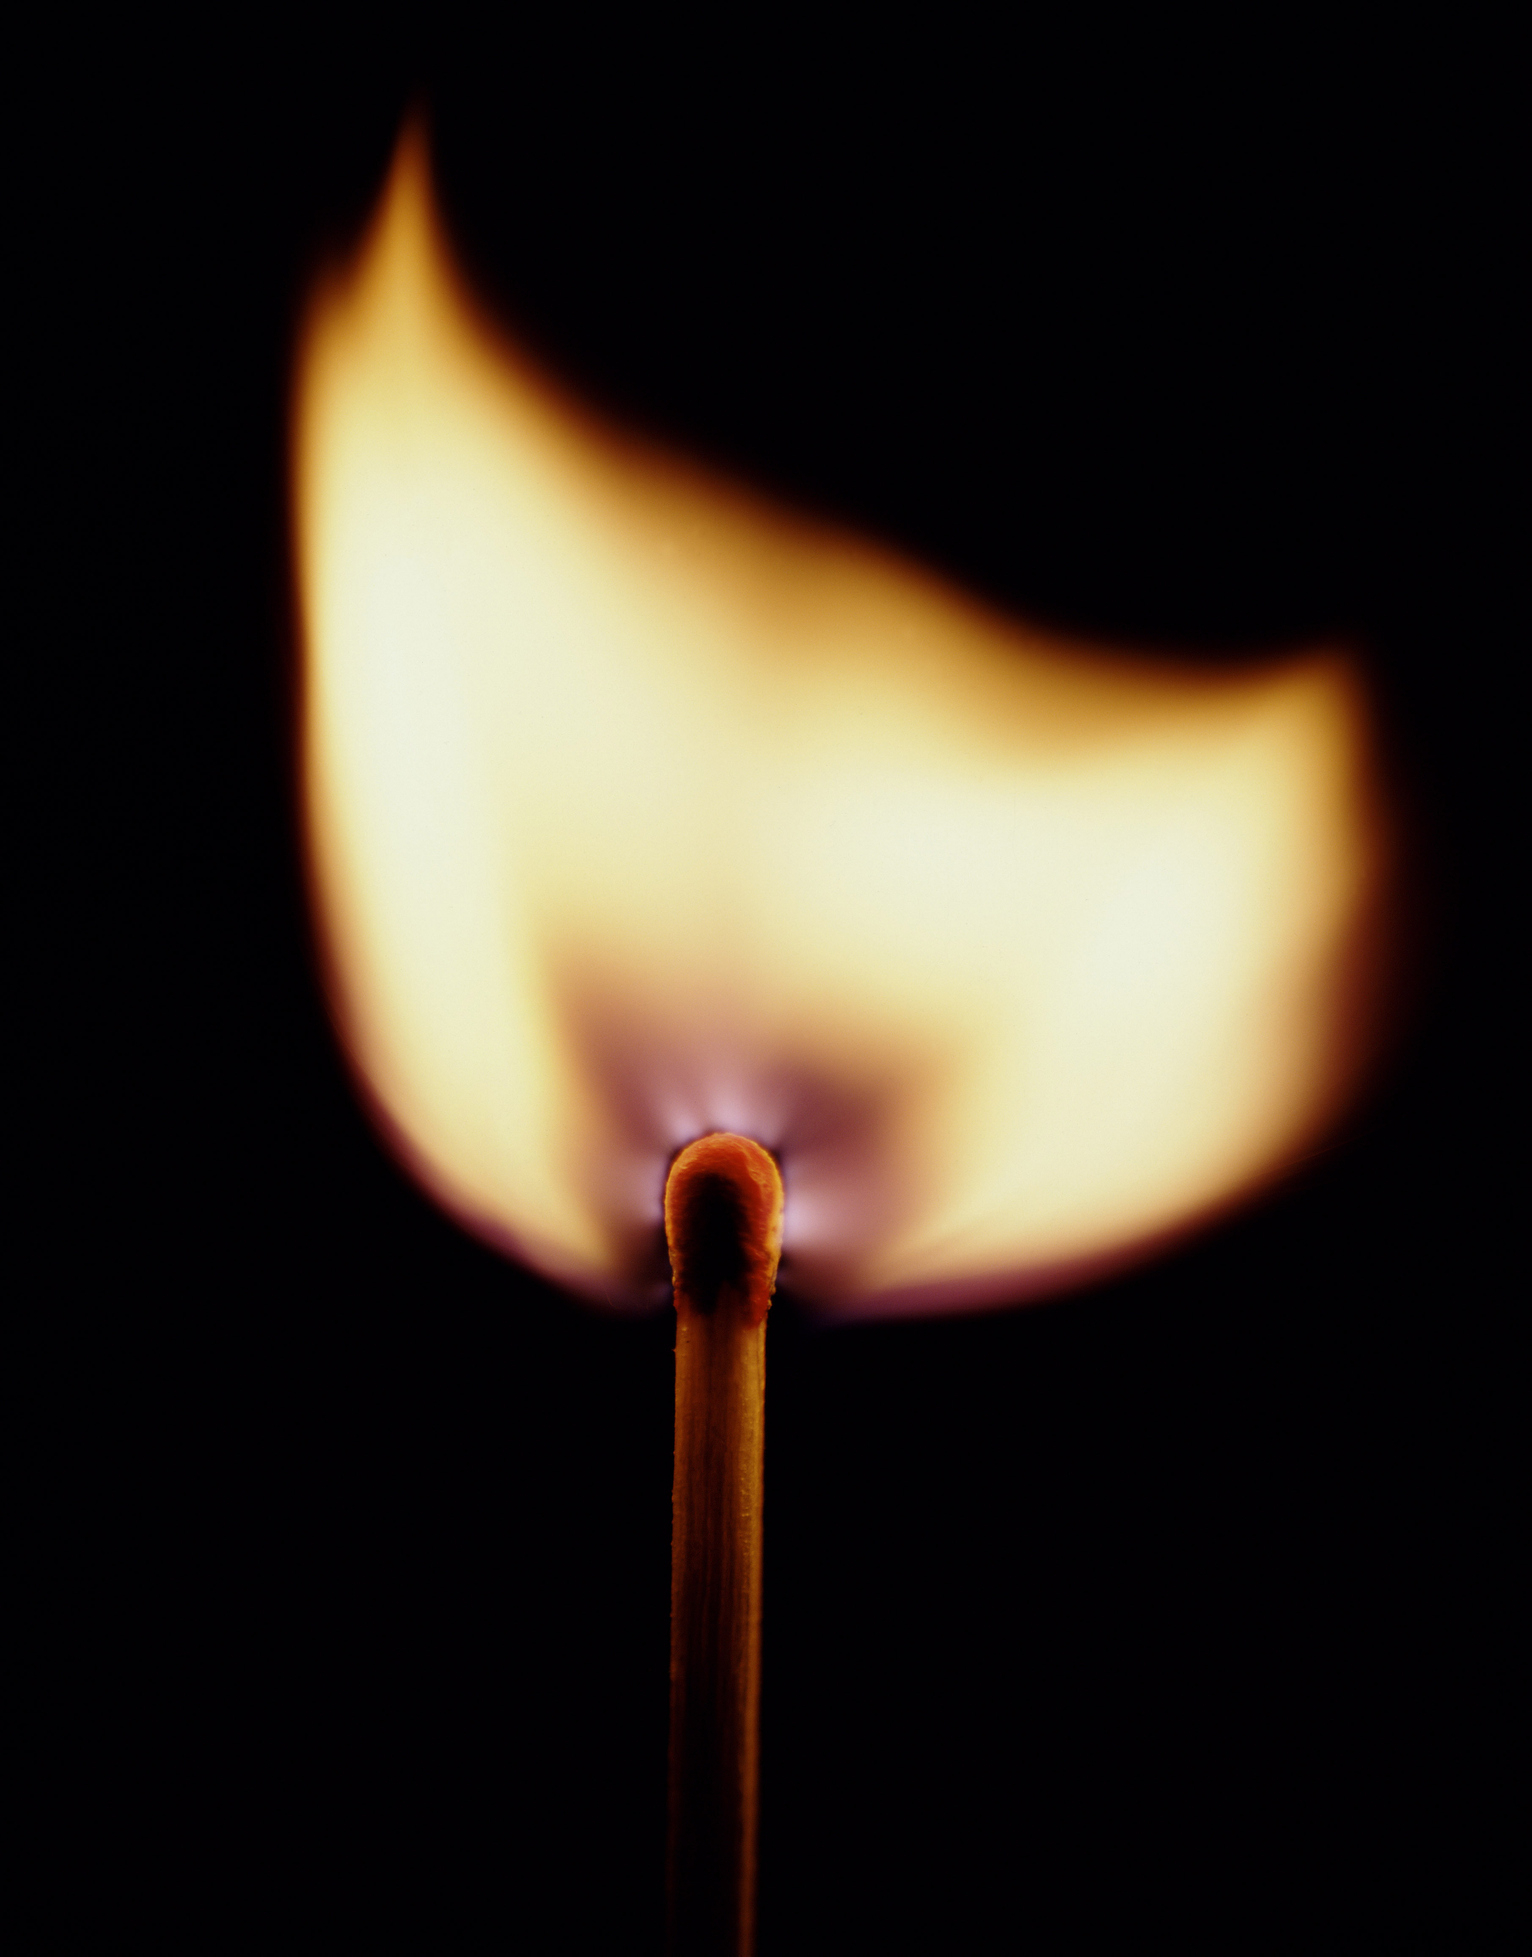 Lit matchstick with a flame against a dark background